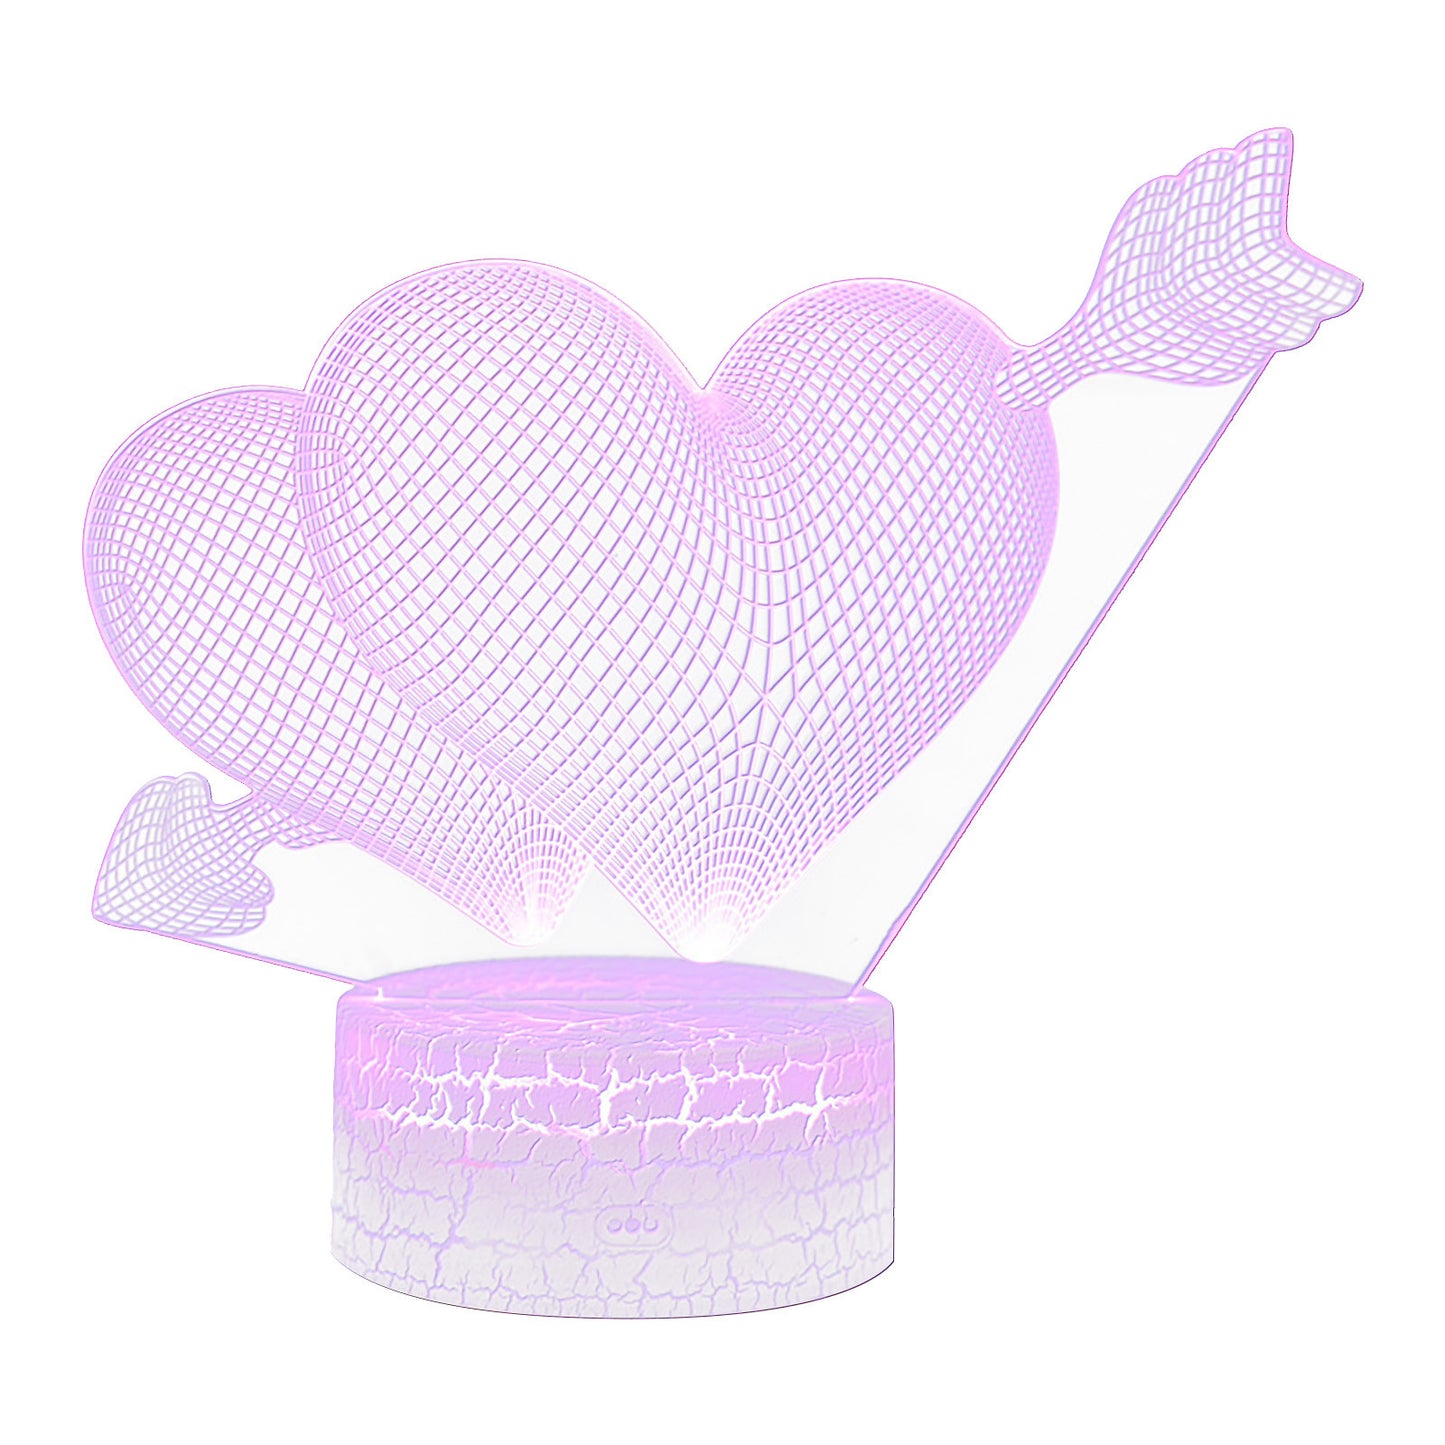 I LOVE YOU Sweet Lover Heart Balloon 3D LED USB Lamp Romantic Decorative Colorful Night Light Girlfriend Gift Mothers Day